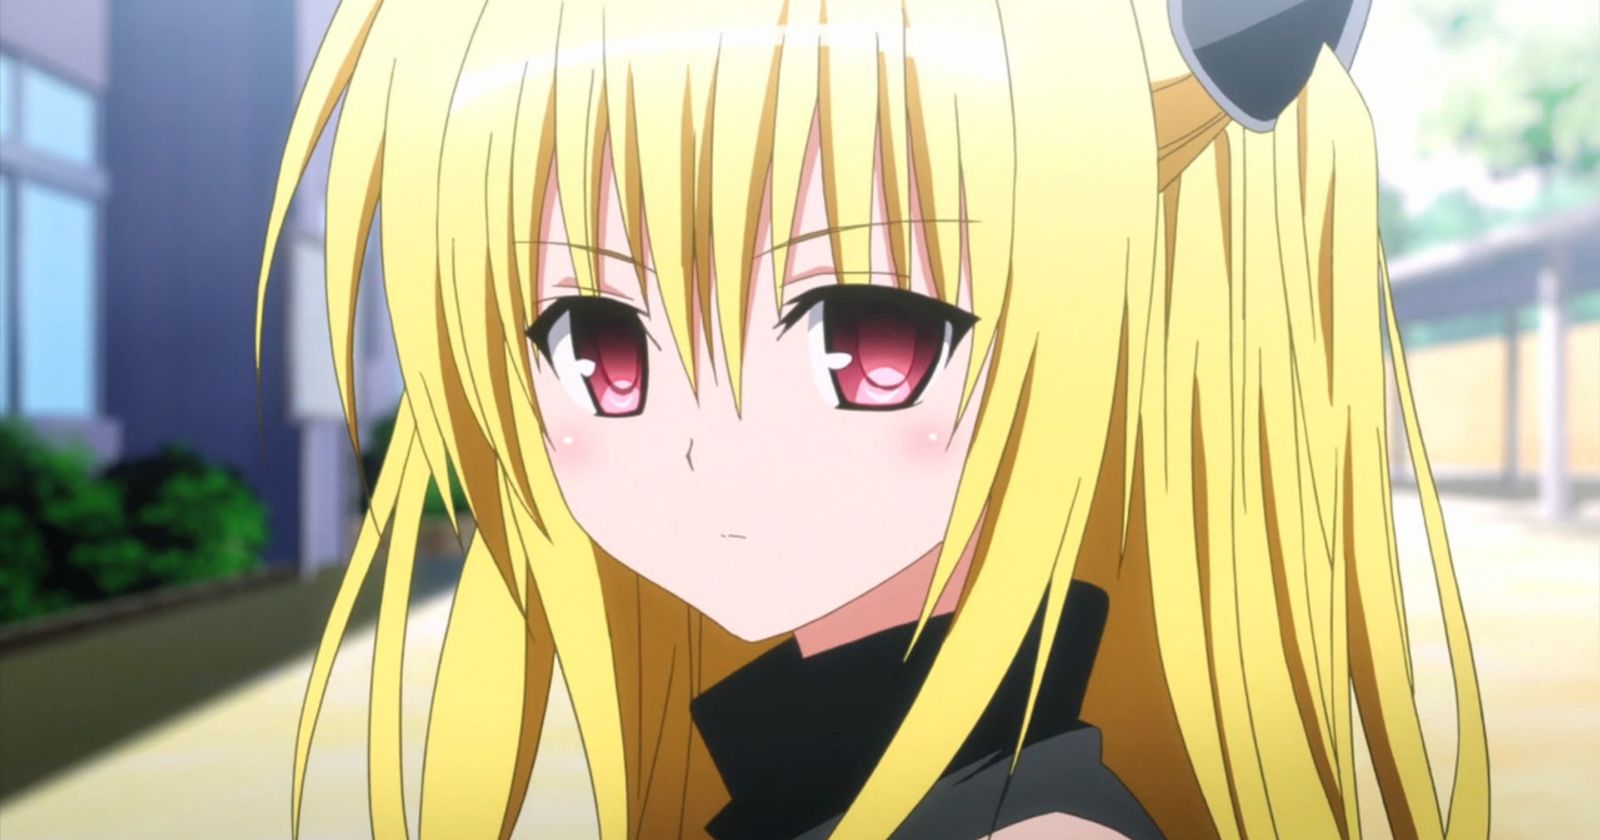 Why isn't to love ru darkness 2 in hidive anymore will it come back? I was  planning to watch it tomorrow : r/Hidive